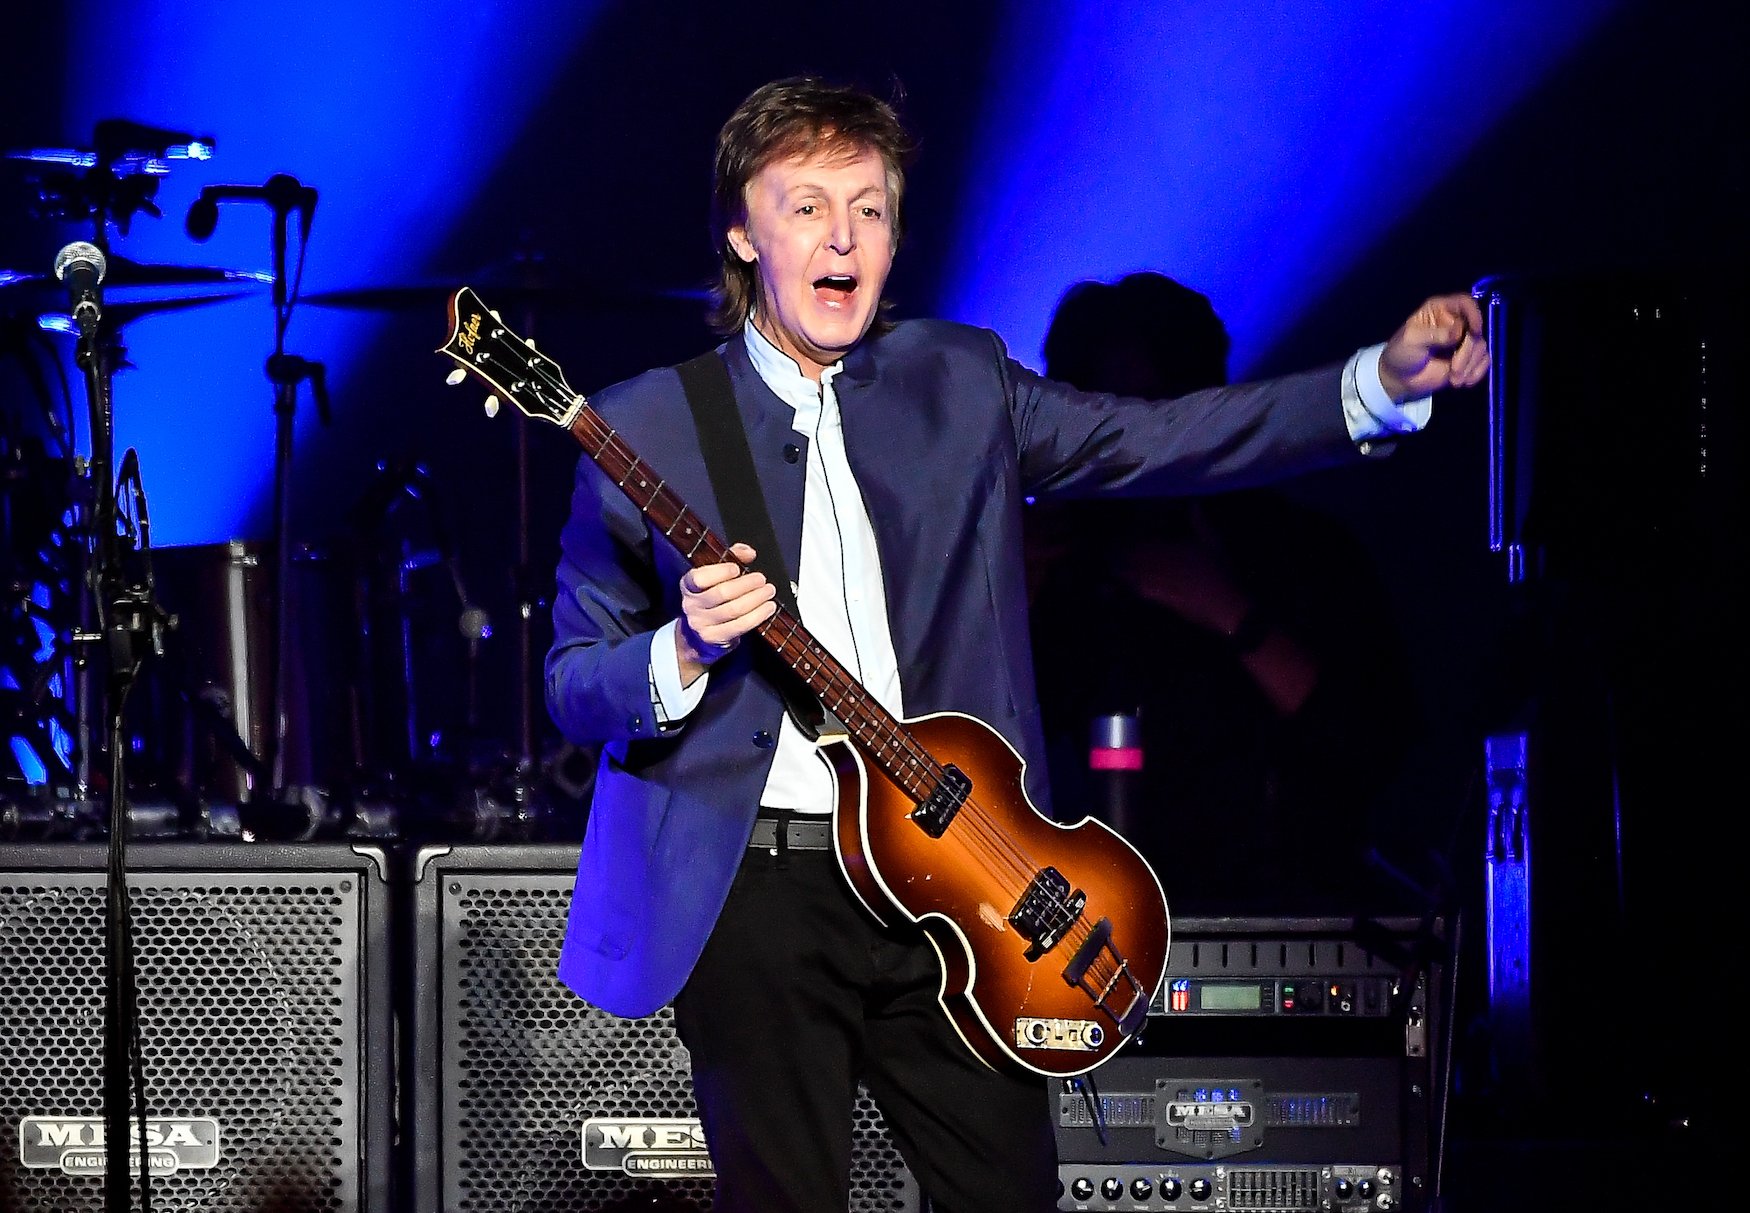 paul McCartney performs at Save Mart center in Fresno, California on his One on One Tour